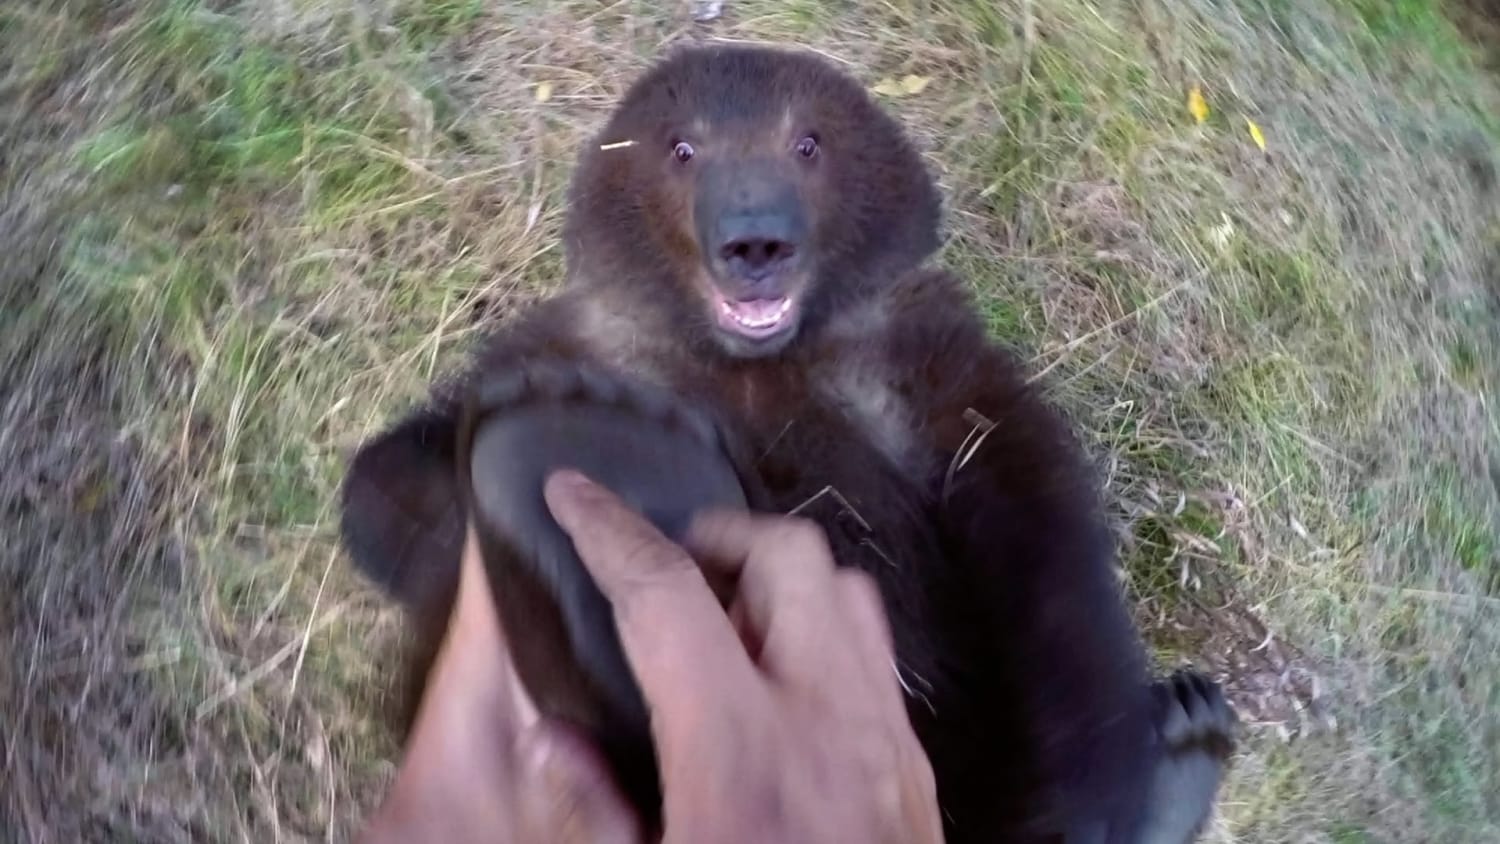 A Little Orphaned Grizzly Bear Cub Likes to Have Her Feet Tickled by the Man Who Rescued Her